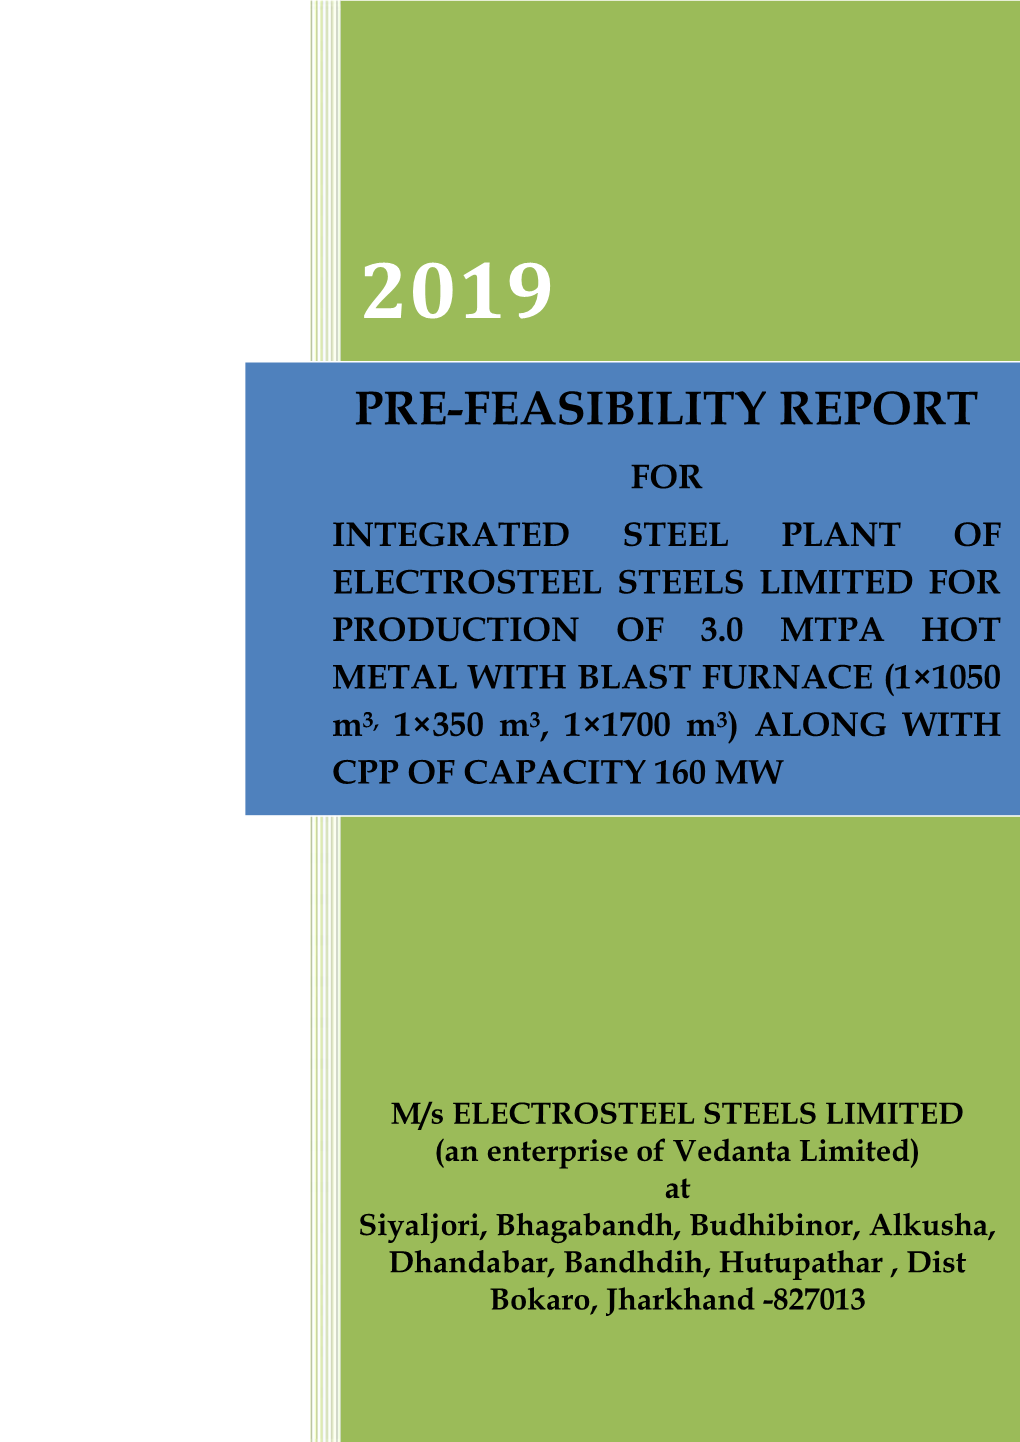 Pre-Feasibility Report for Integrated Steel Plant of Electrosteel Steels Limited for Production of 3.0MTPA Hot Metal with Blast